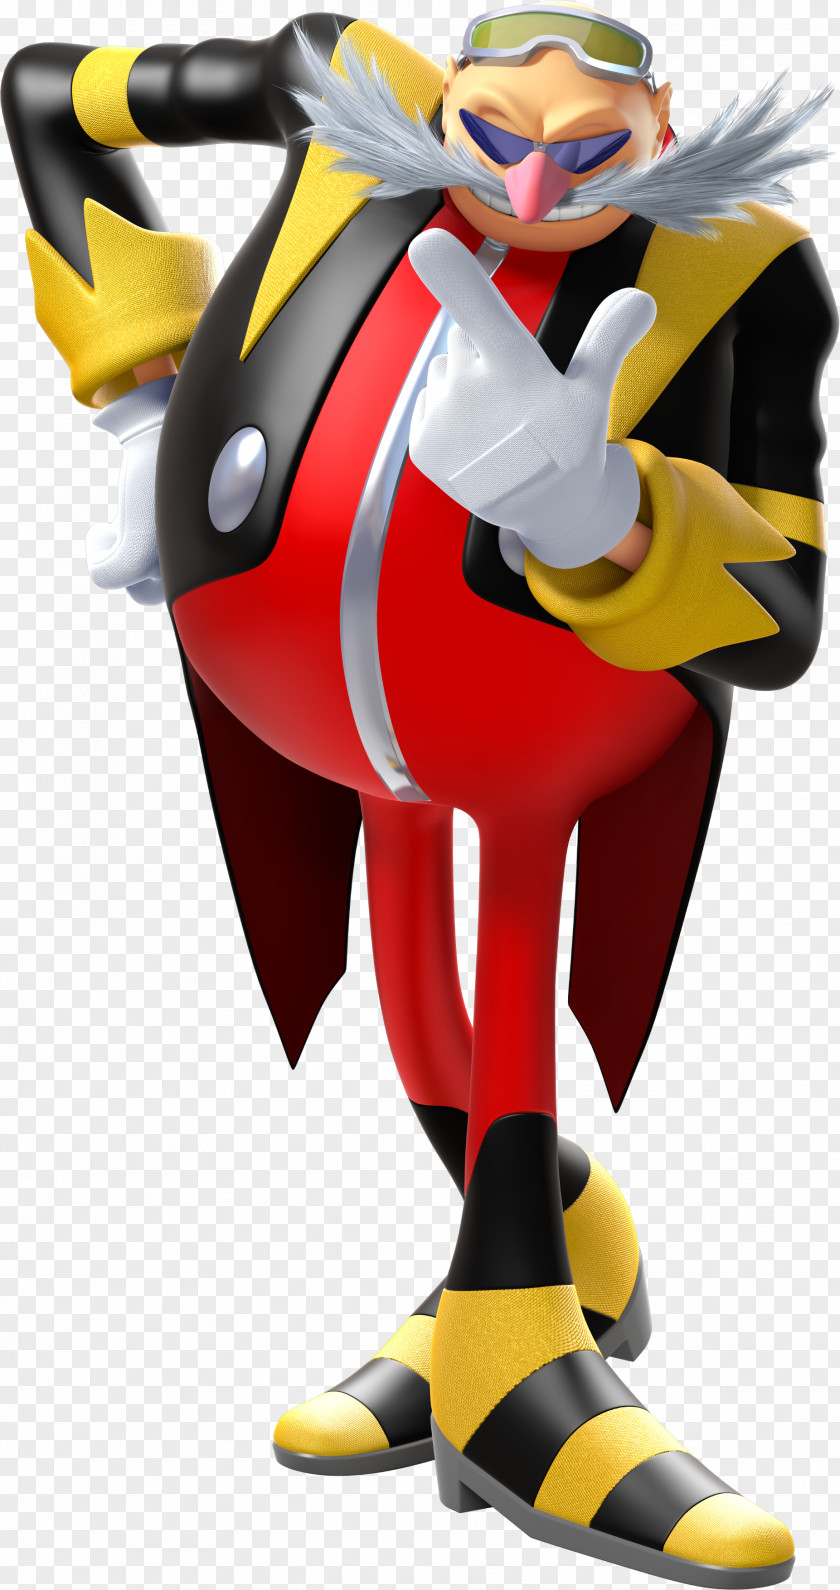 Rio Doctor Eggman Amy Rose Mario & Sonic At The Olympic Games Hedgehog Wii PNG